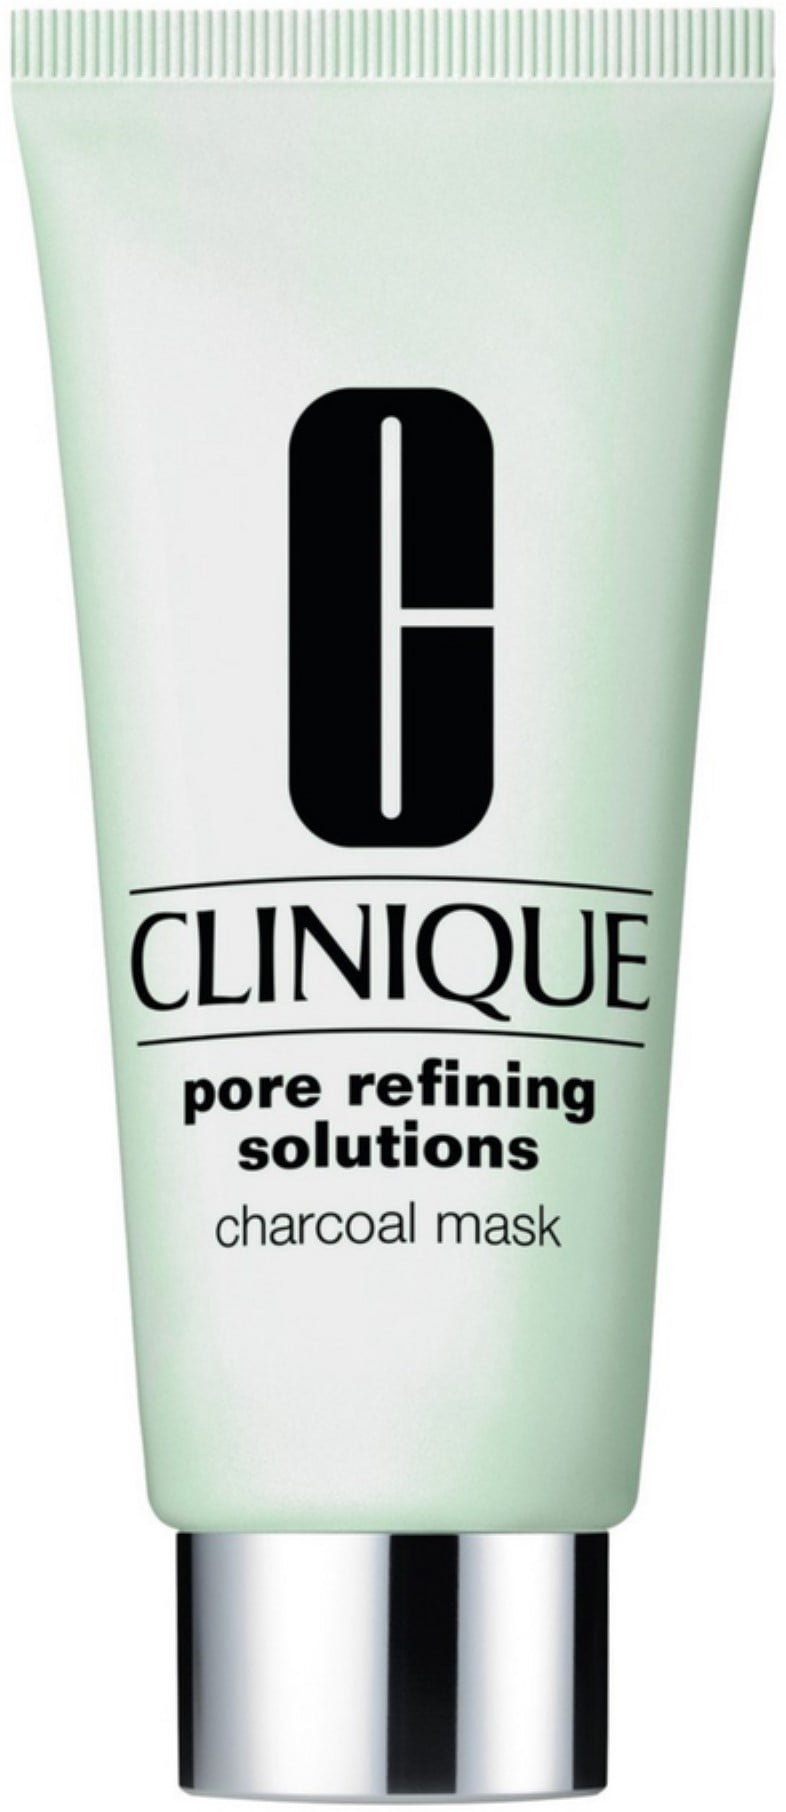 whisky svært absorption Clinique 'Pore Refining Solutions' Charcoal Mask 3.4 oz (Pack of 6) -  Walmart.com